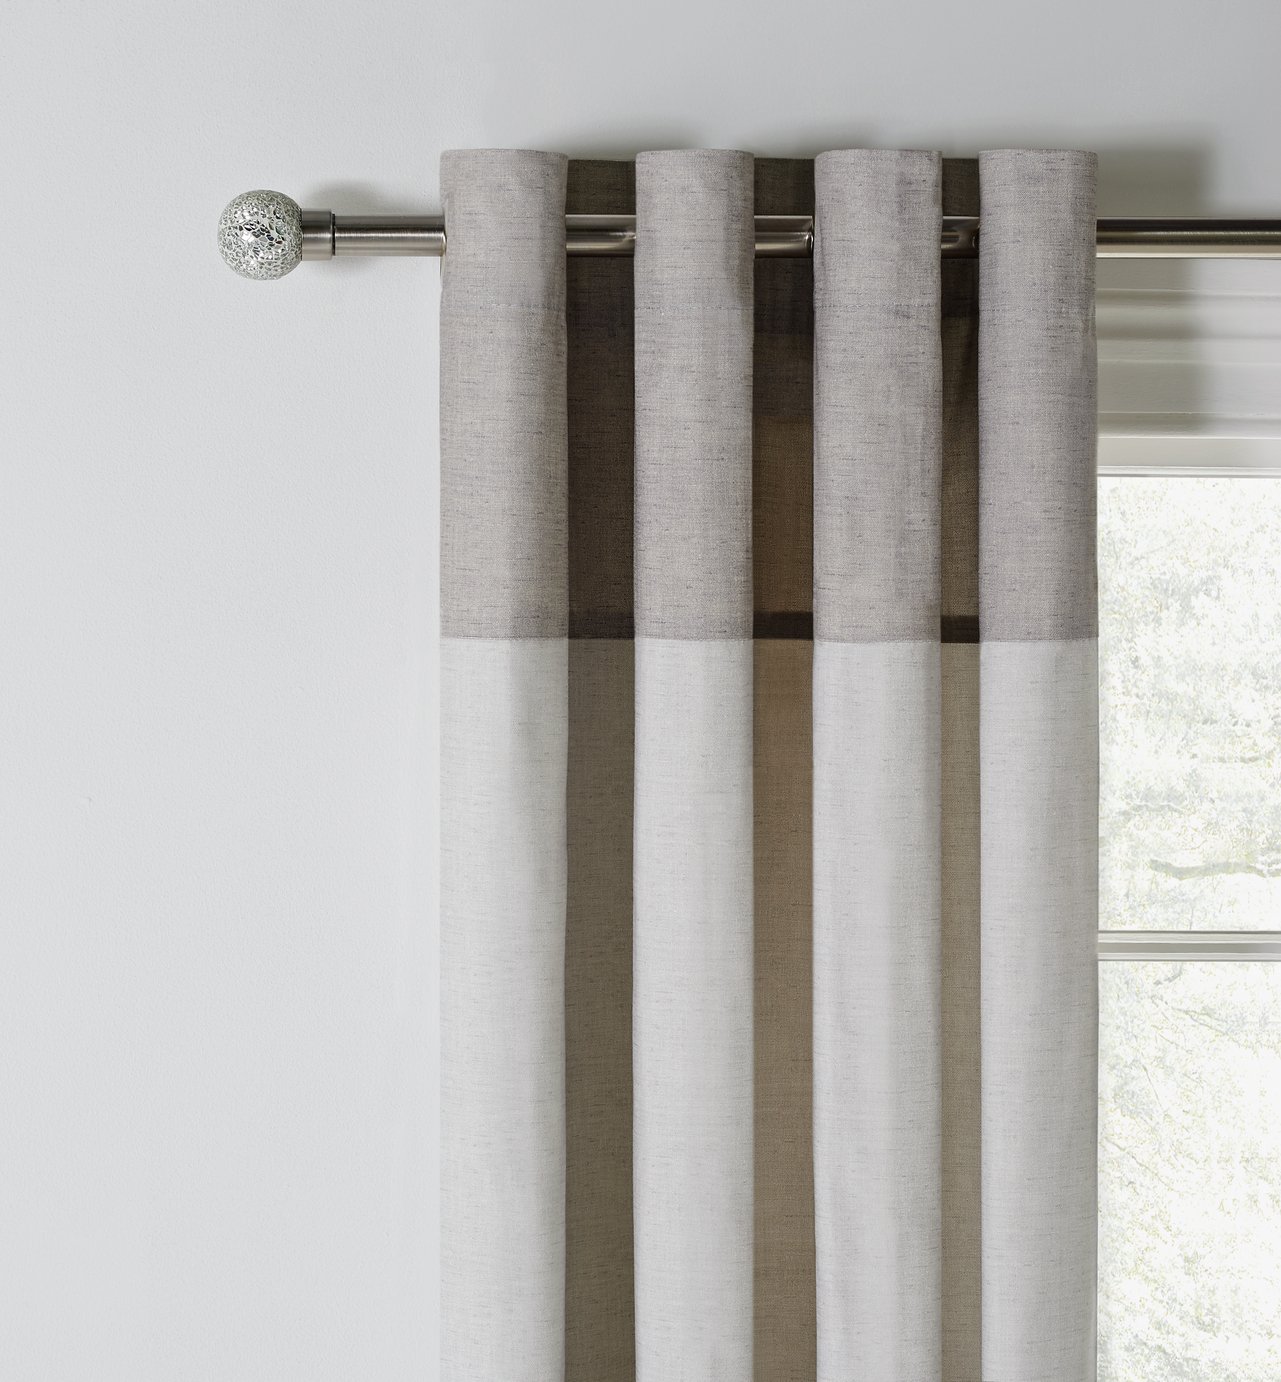 Argos Home Dublin Lined Eyelet Curtains 229x229cm -Dove Grey review